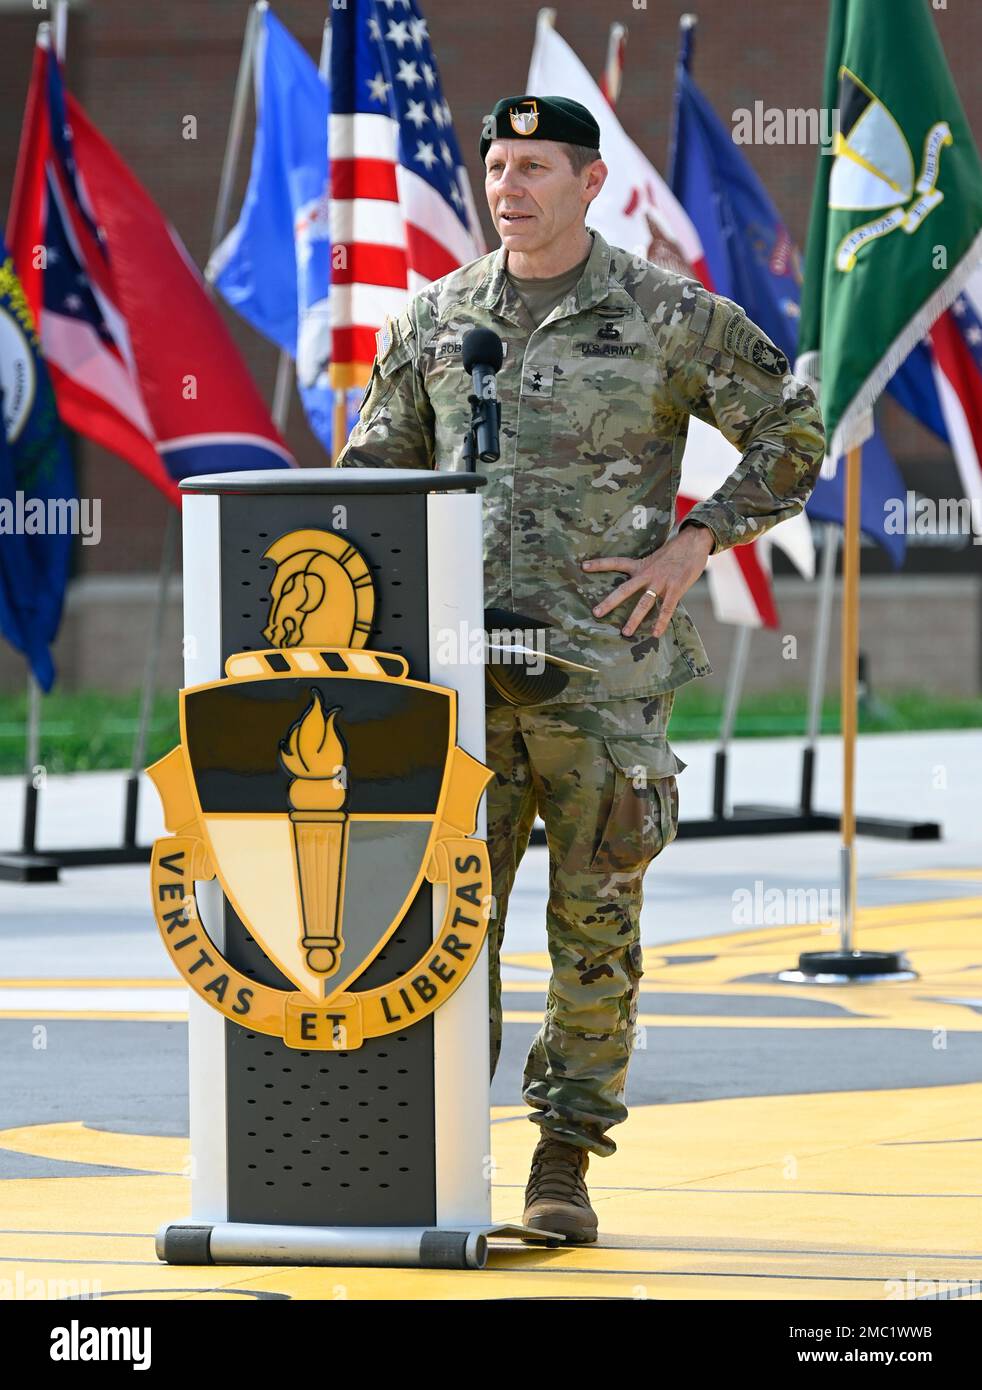 Major General Patrick B. Roberson, commander, U.S. Army John F. Kennedy Special Warfare Center and School, speaks during a ribbon cutting ceremony to dedicate the two newest buildings on the USAJFKSWCS campus at Fort Bragg, NC June 23, 2022. Chapman Hall, named for SFC Nathan R. Chapman, will house advanced skills, network courses, five training battalion headquarters and six company headquarters. Volckmann Hall, named for BG Russell W. Volckmann, will contain the 1st SWTG(A) headquarters, the Warrant Officer Institute and the Special Forces Officer Course. Stock Photo